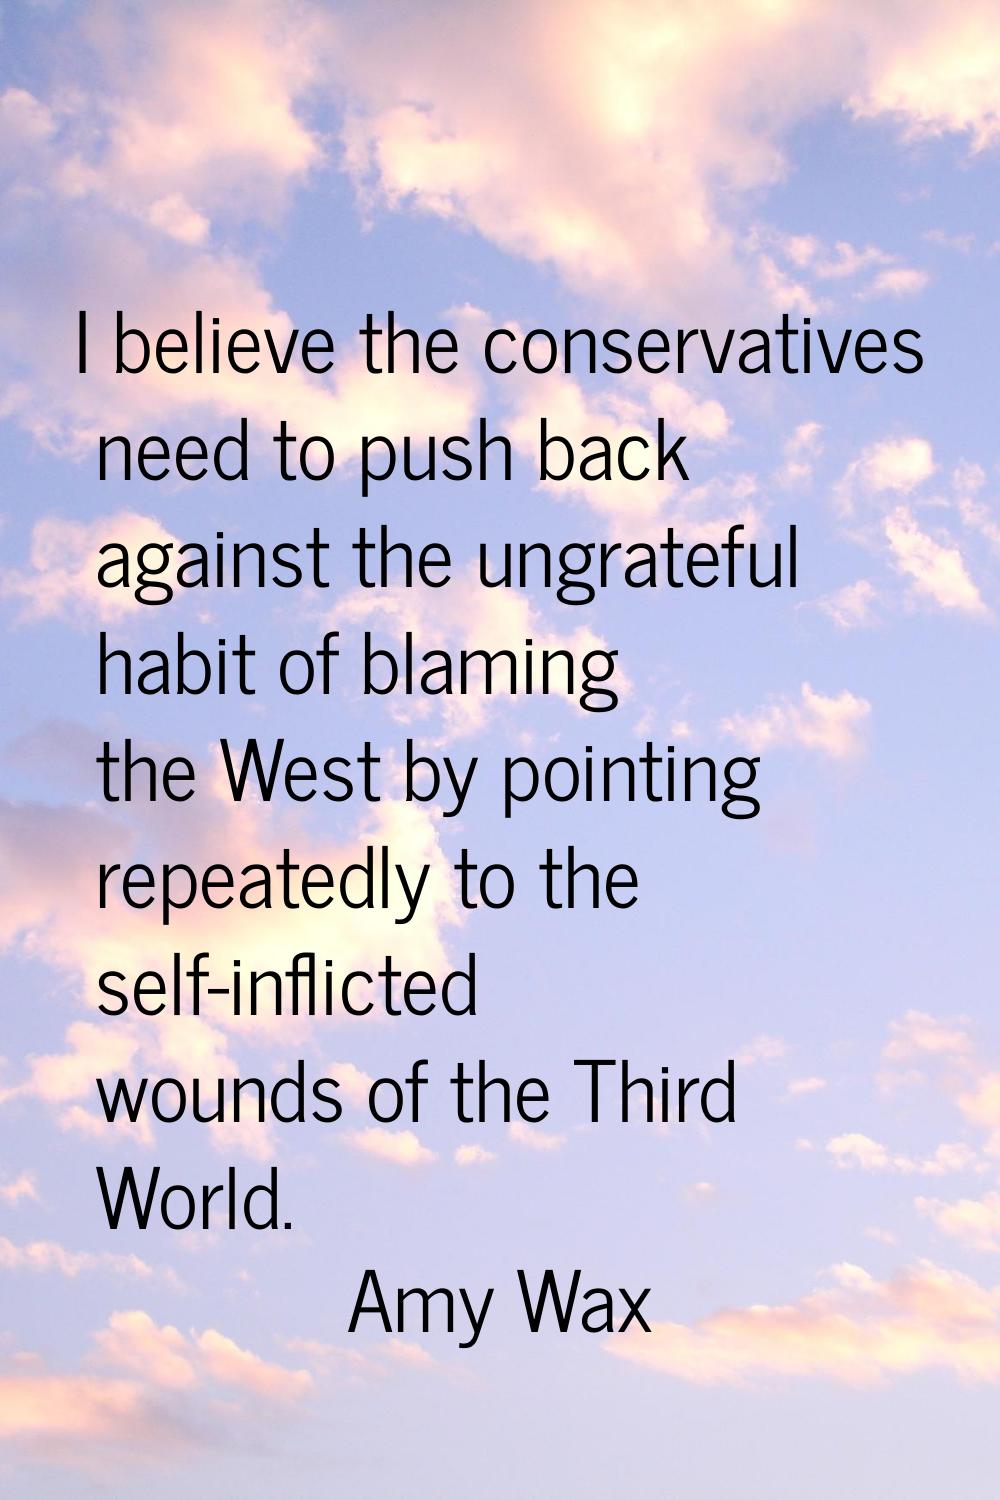 I believe the conservatives need to push back against the ungrateful habit of blaming the West by p